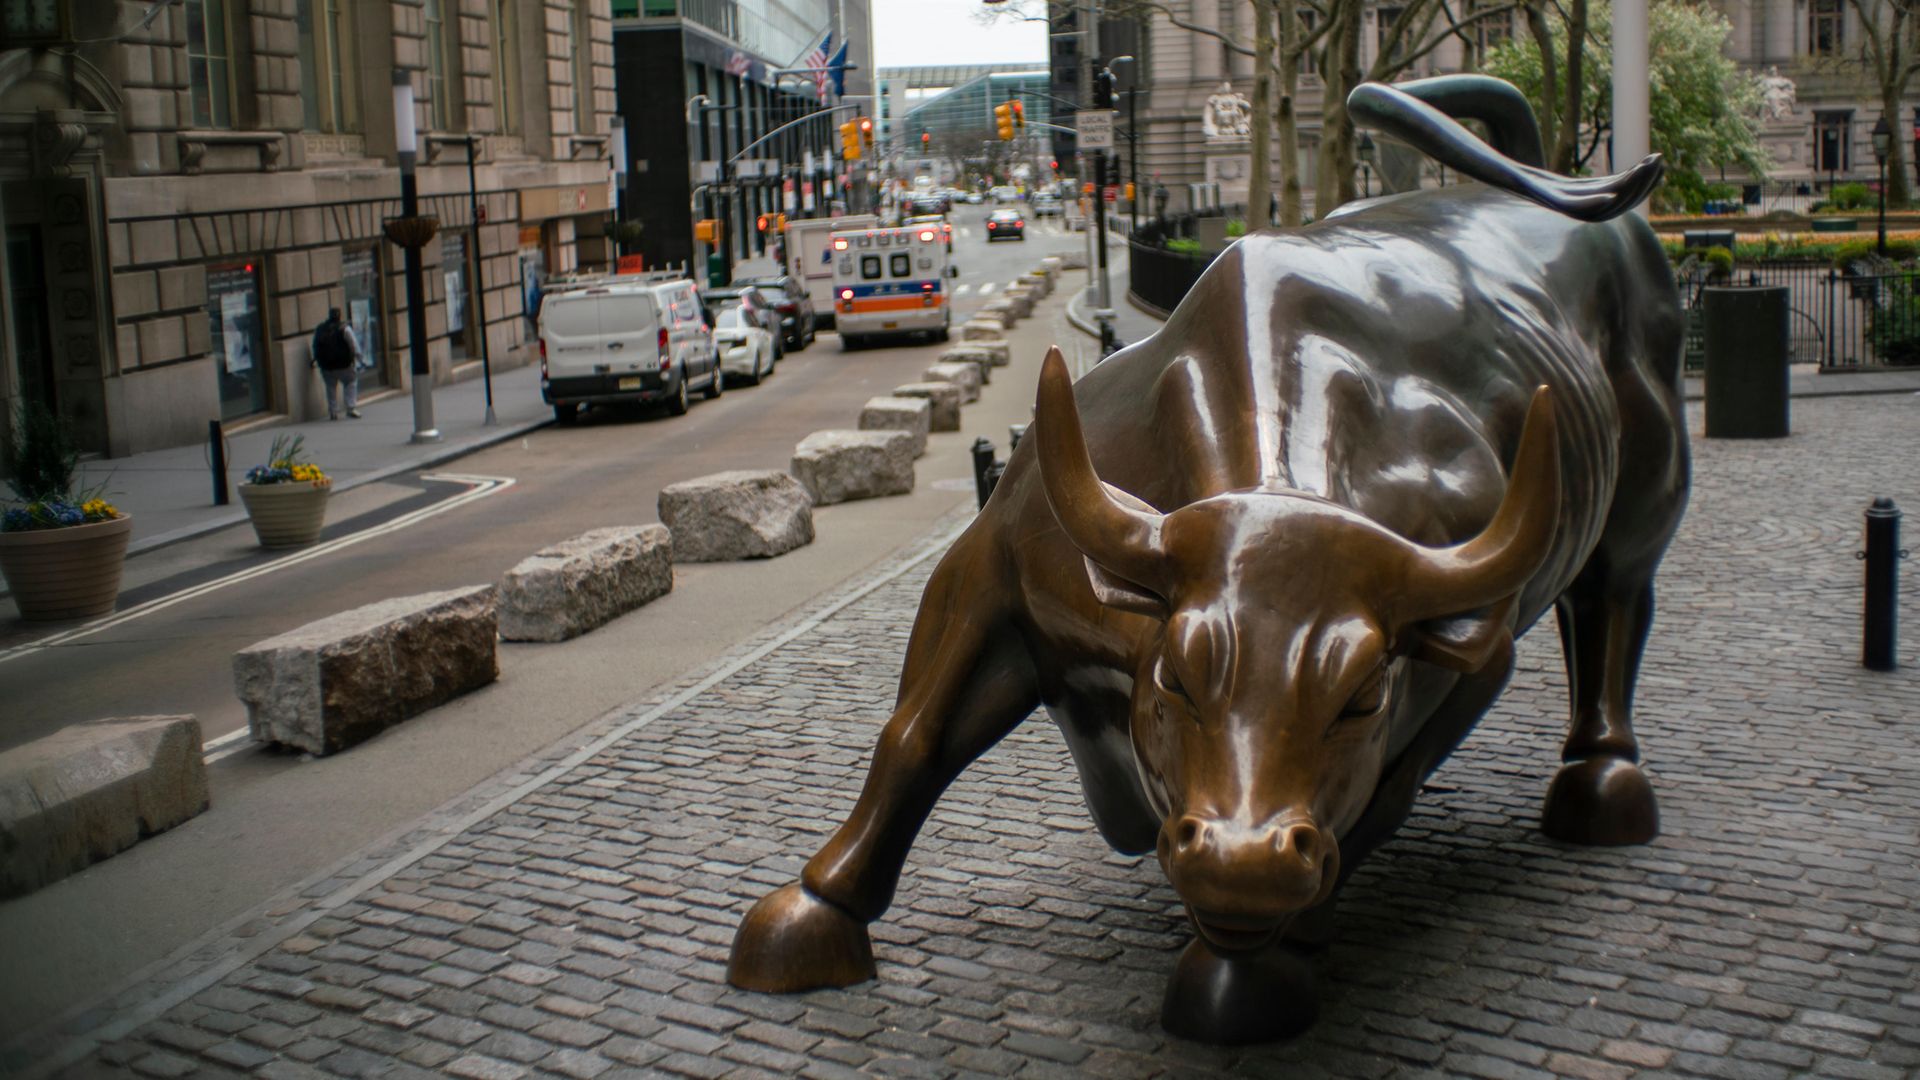 The Charging Bull is seen on an empty Wall Street in New York City. United States - Credit: VIEWpress via Getty Images